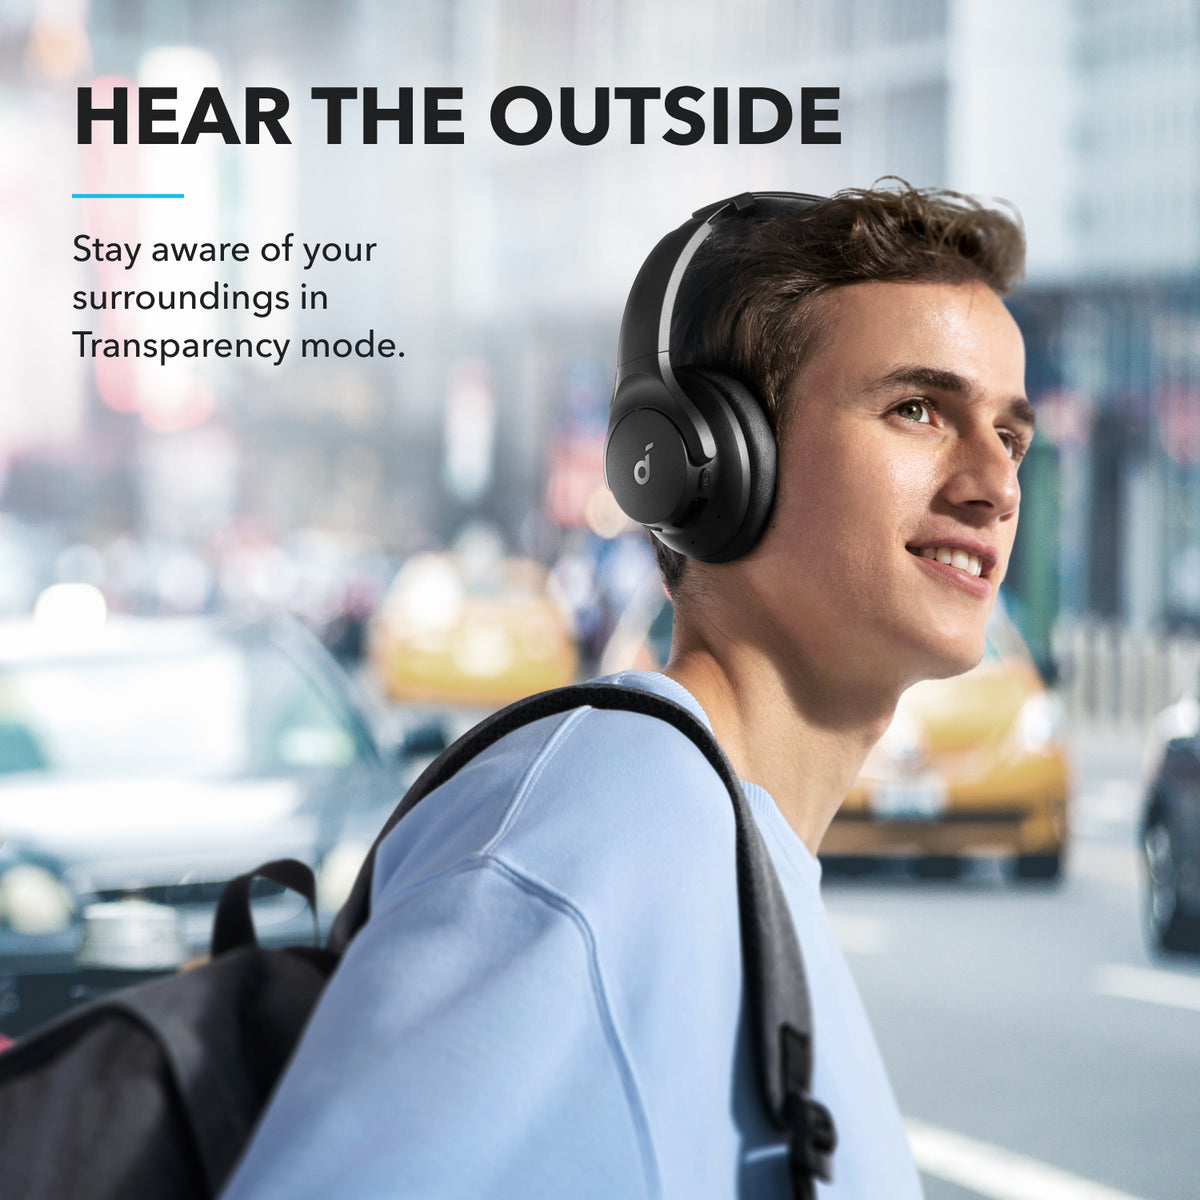 Soundcore by Anker Q20i Hybrid Active Noise Cancelling Headphones, Wireless  Over-Ear Bluetooth, 40H Long ANC Playtime, Hi-Res Audio, Big Bass